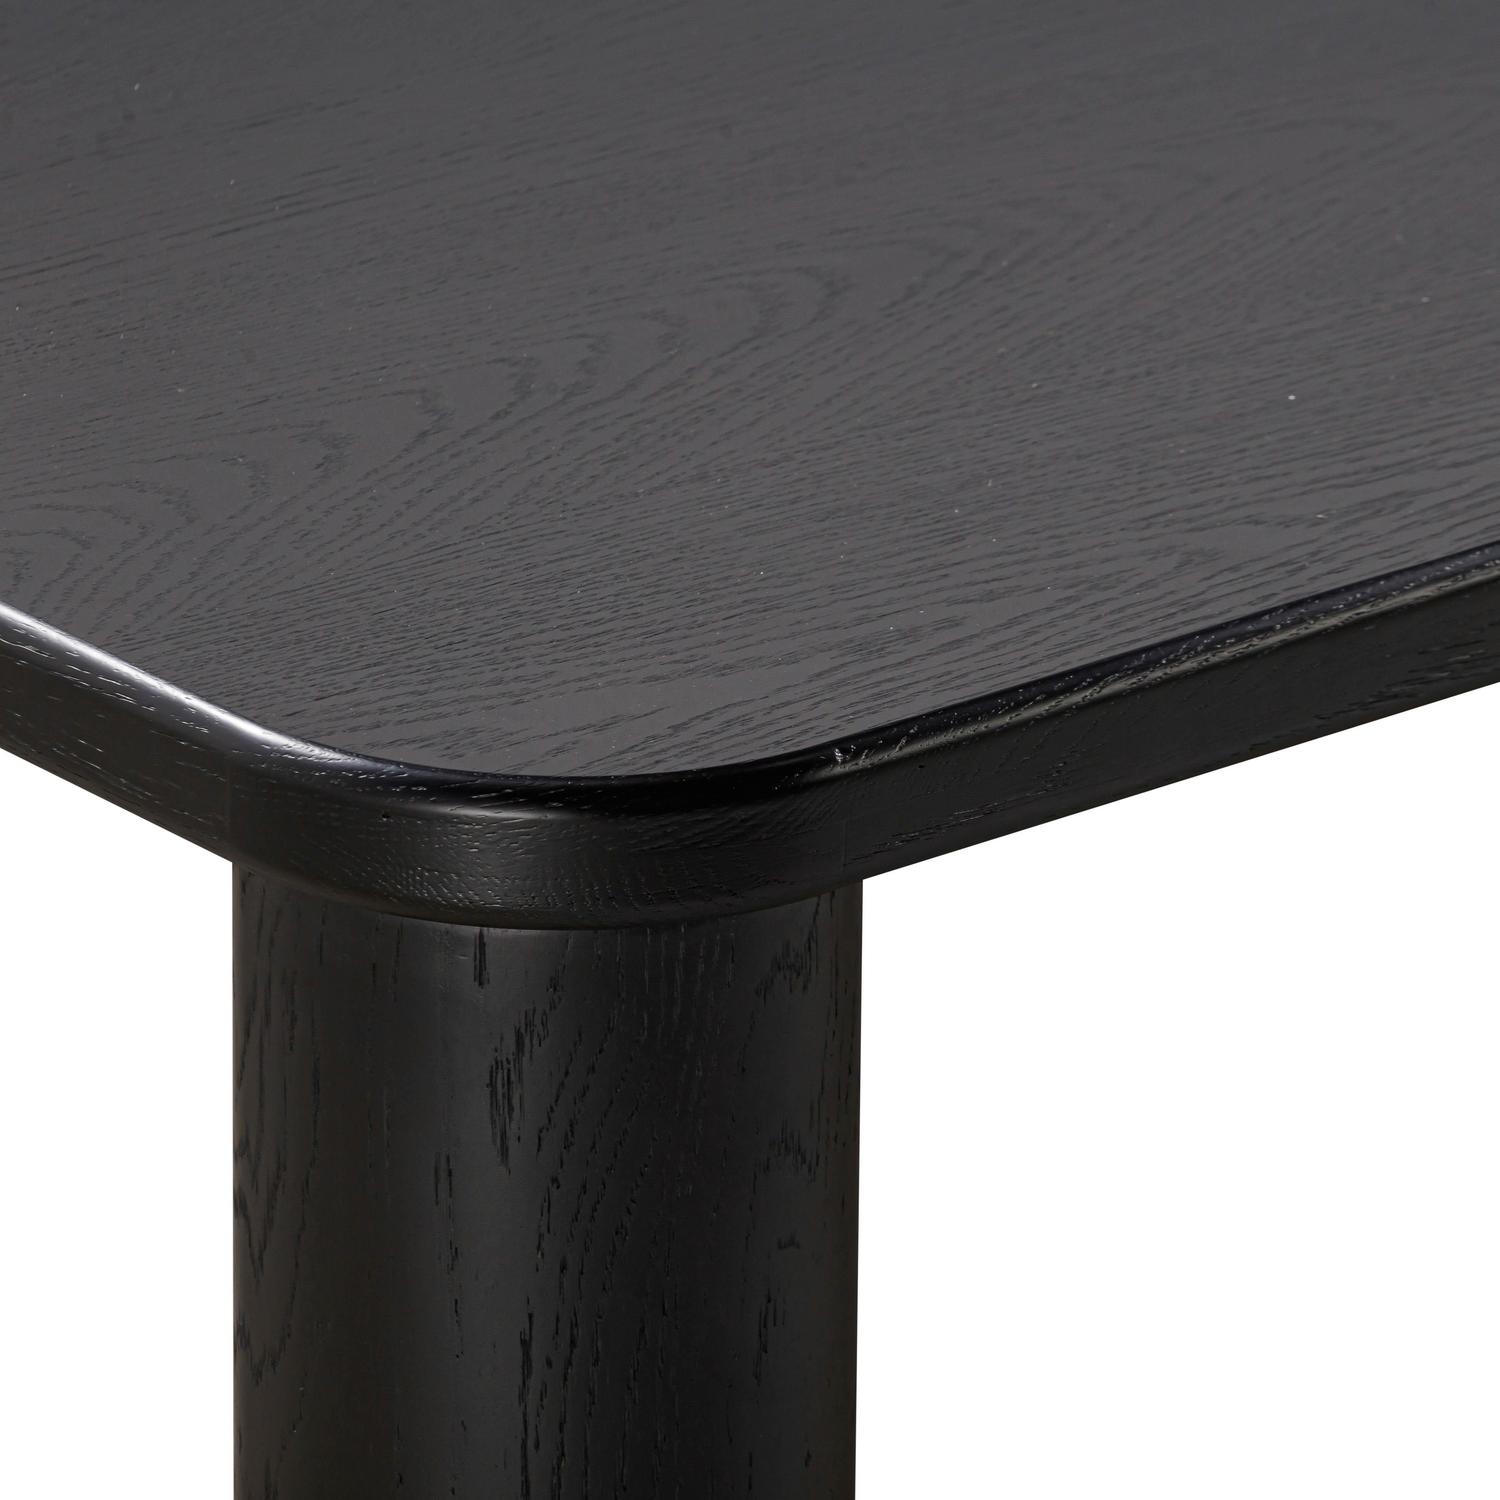 circular dining table with leaf Tov Furniture Dining Tables Black